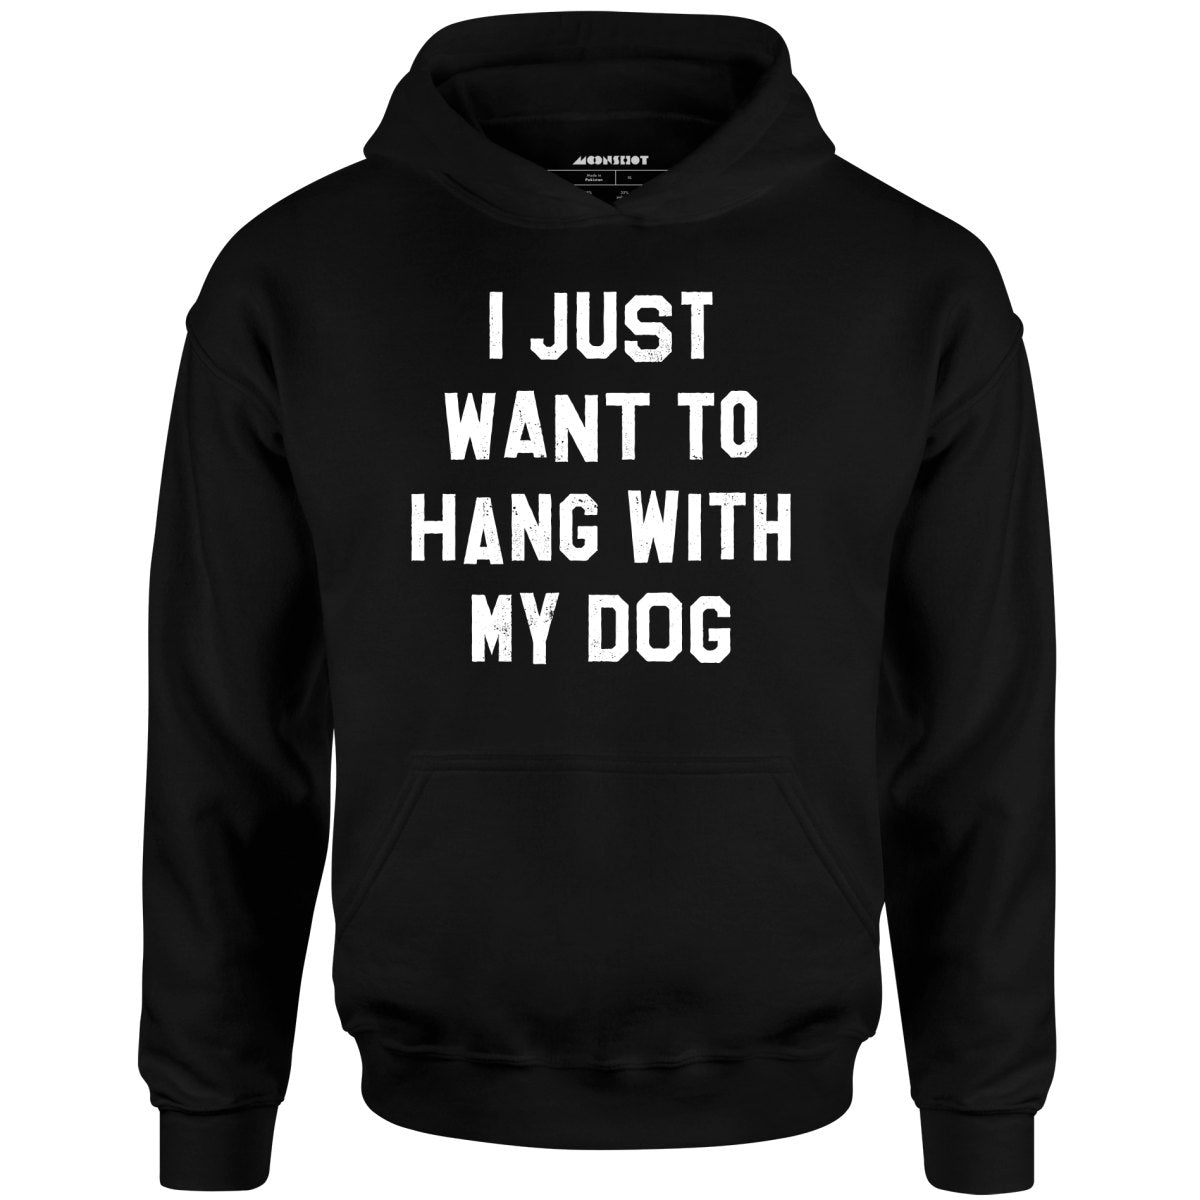 I Just Want to Hang With My Dog - Unisex Hoodie